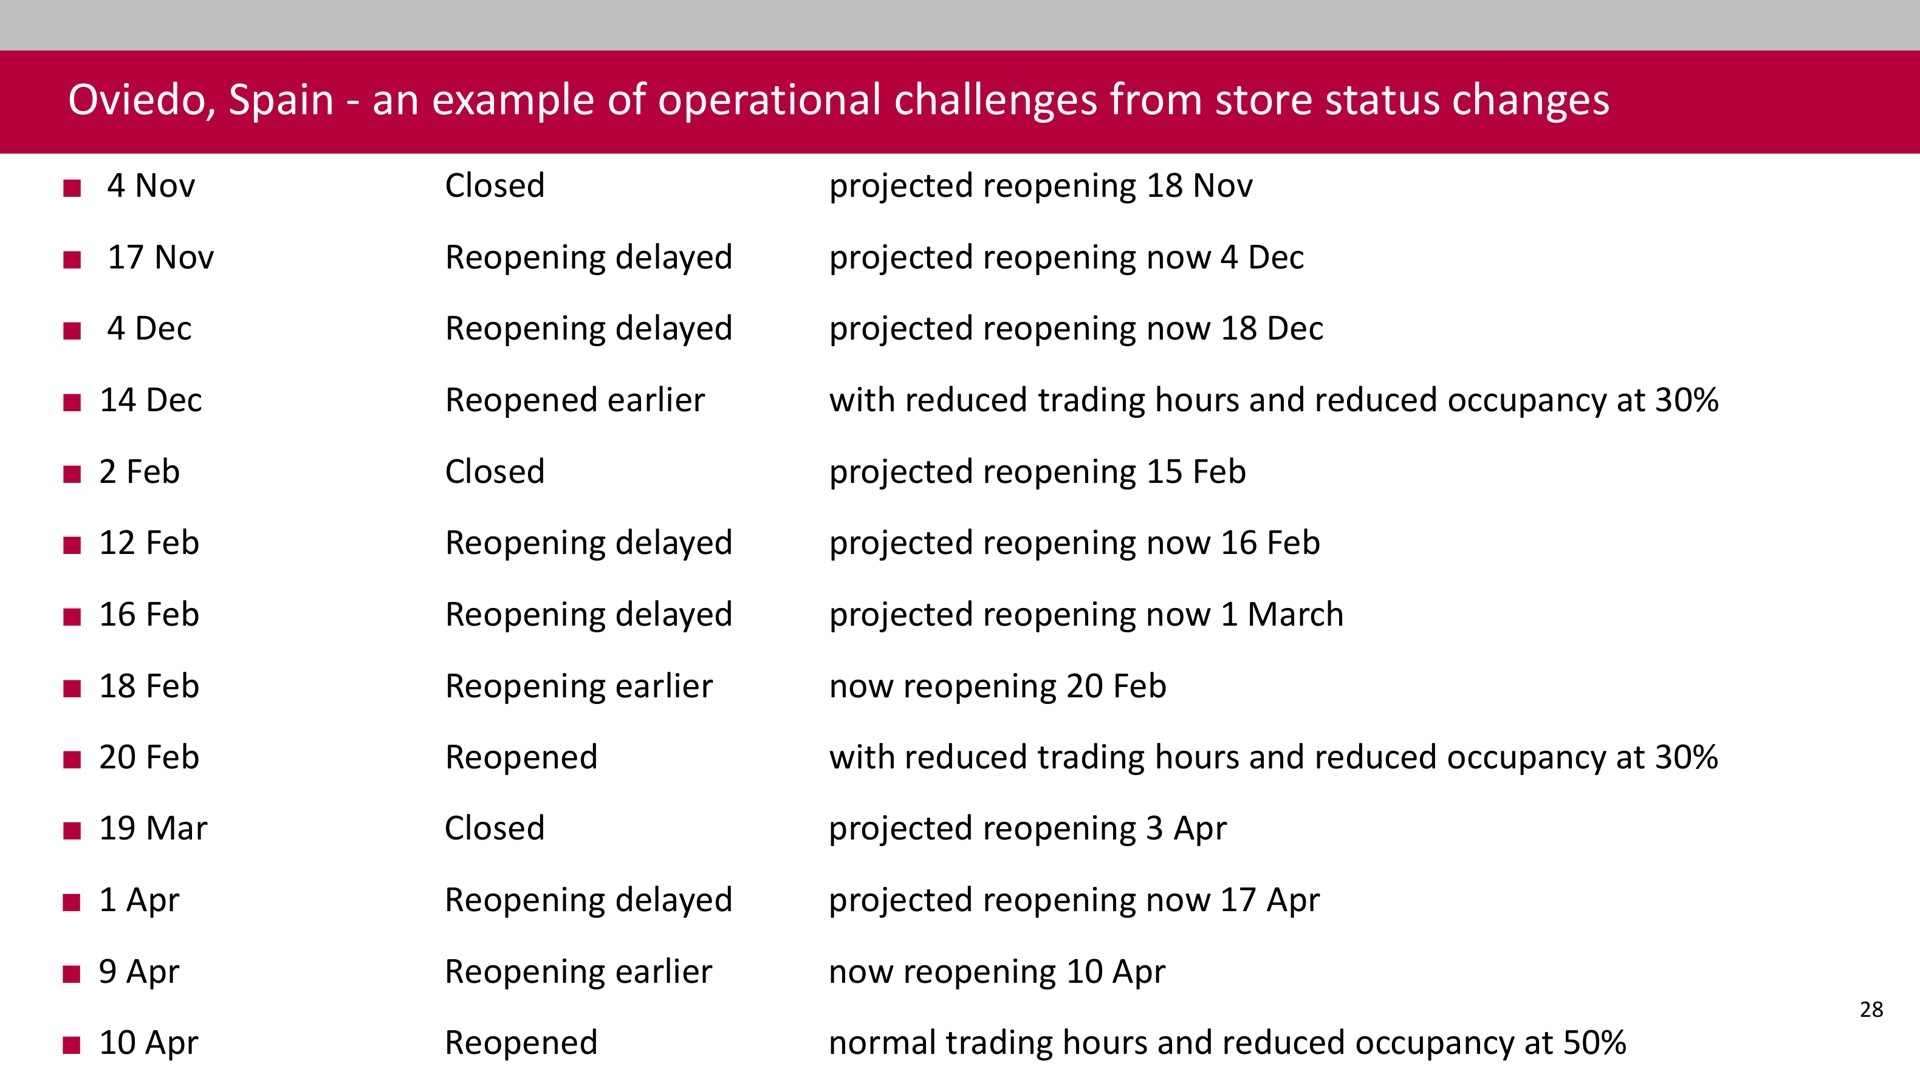 an example of operational challenges from store status changes | Associated British Foods